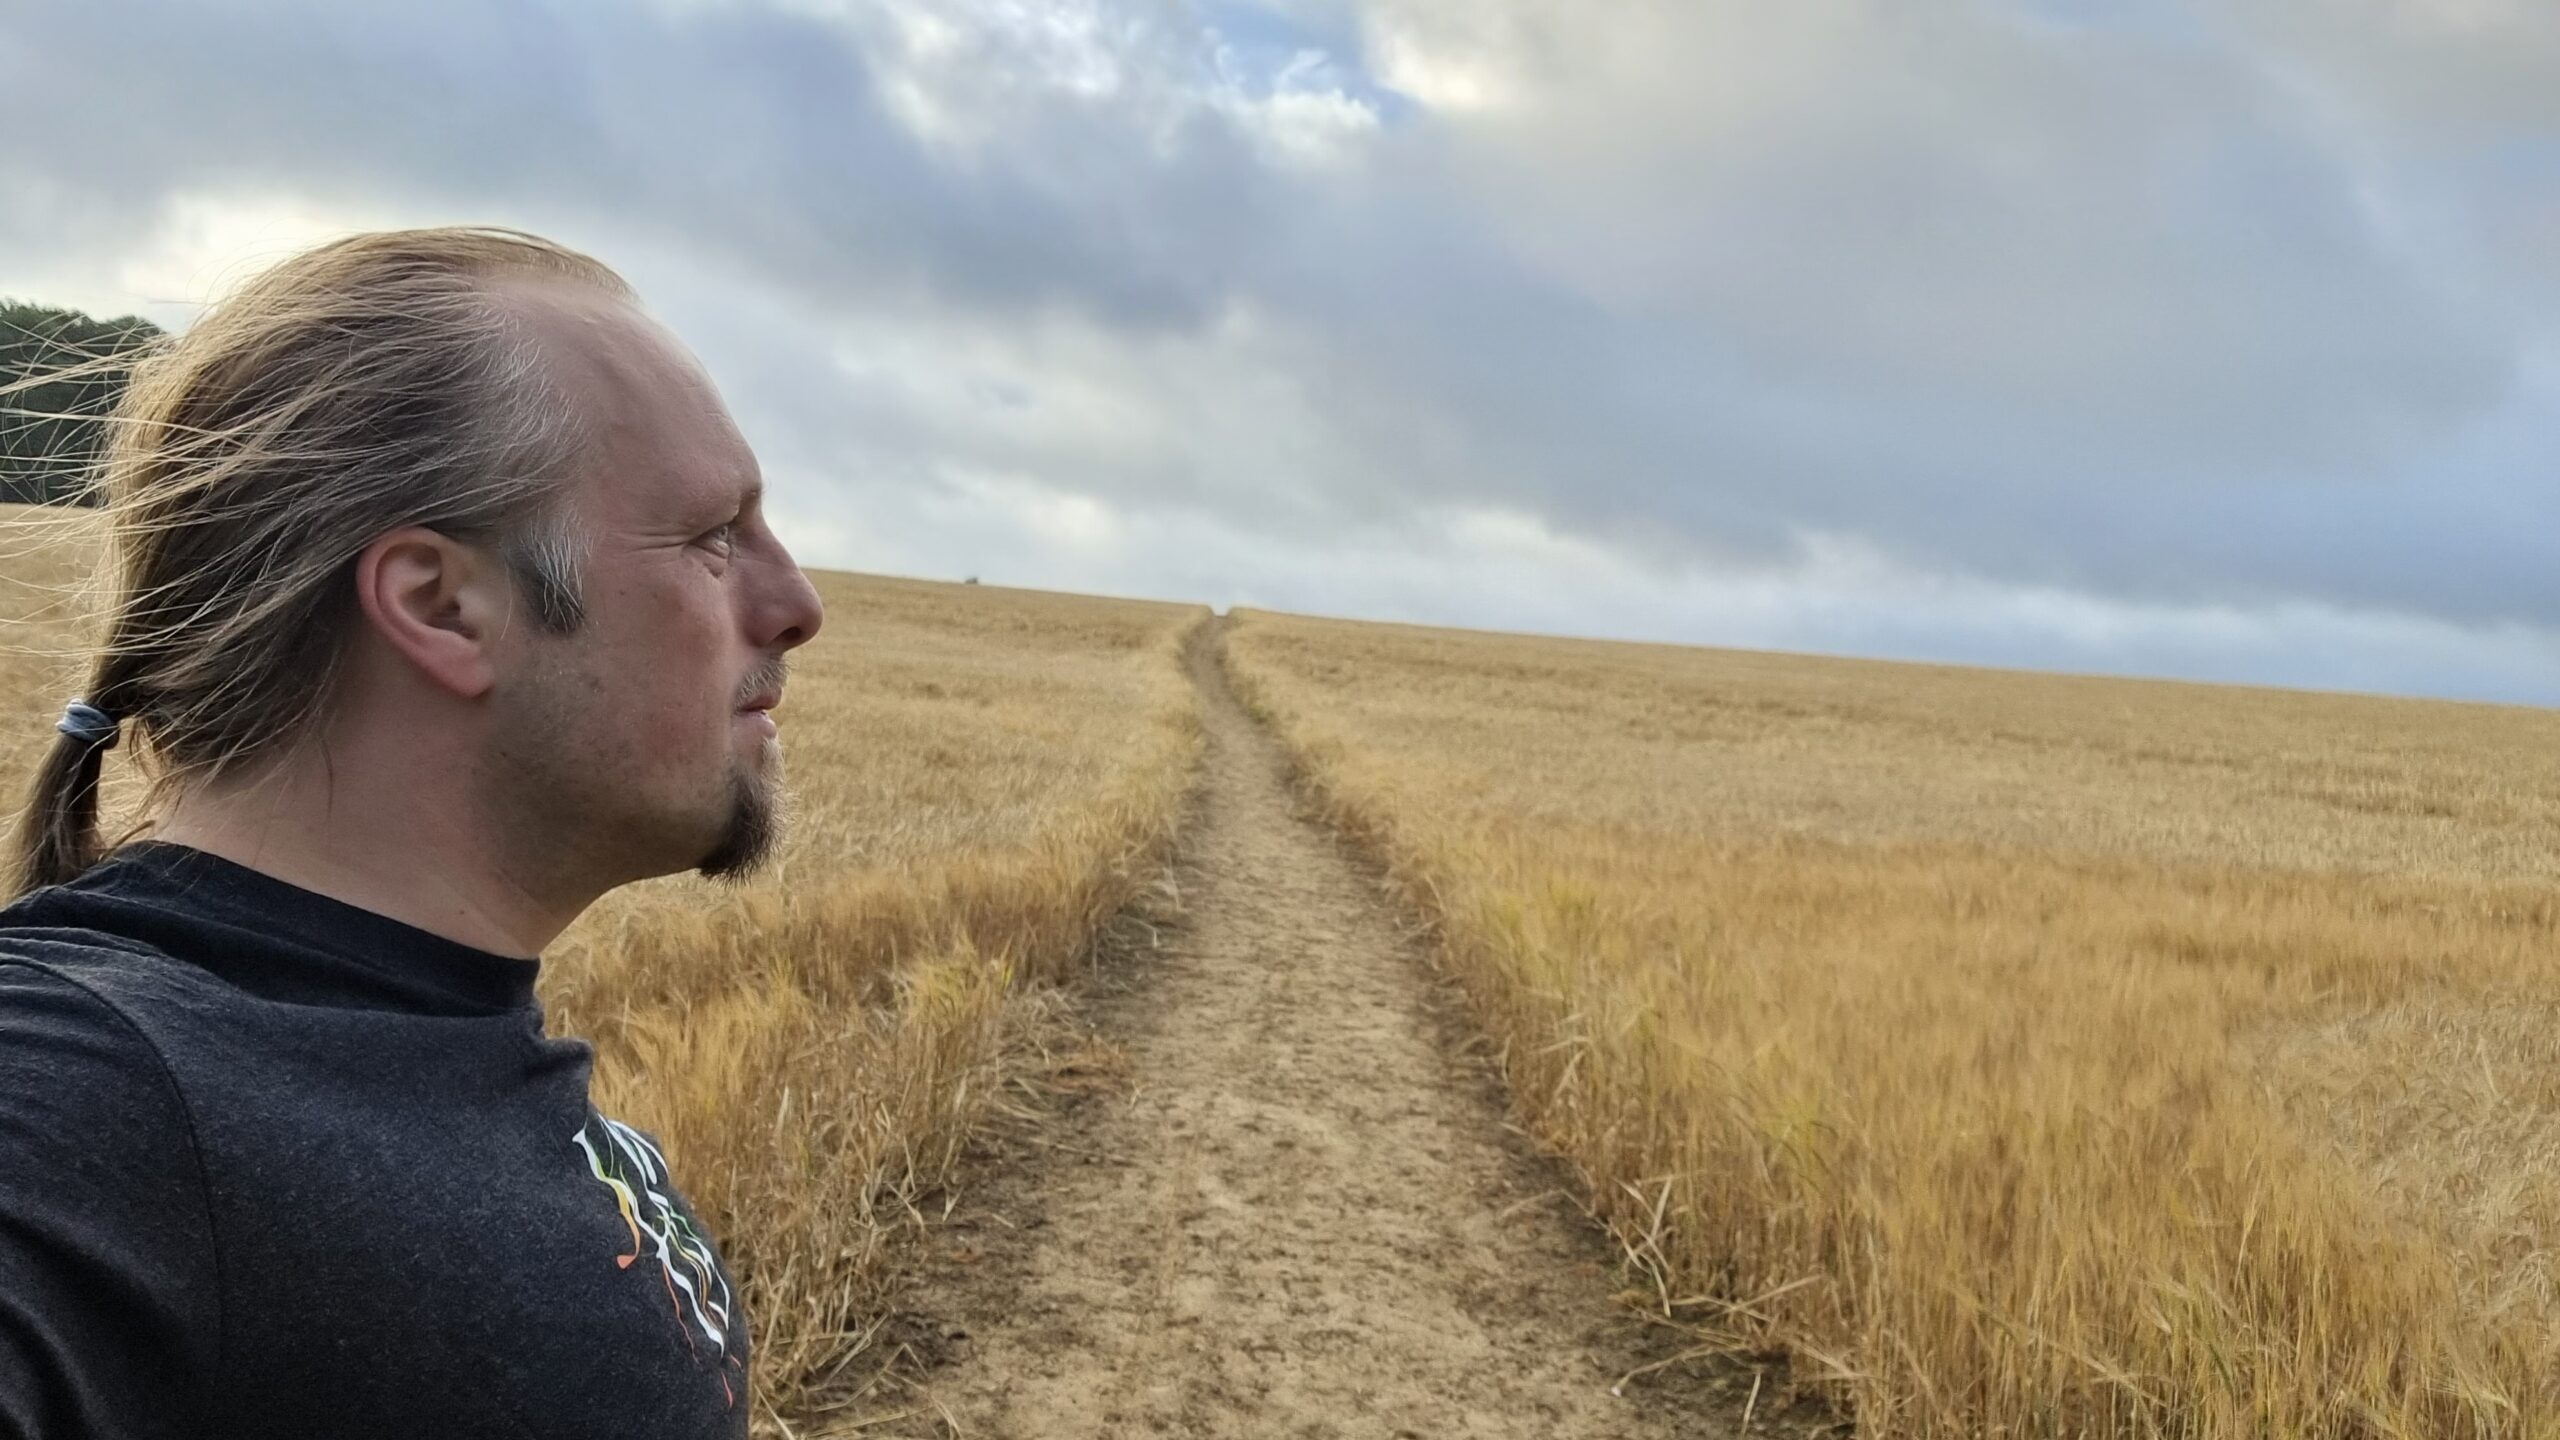 Dan, on a path through a young cornfield, stares towards the distant clouds.